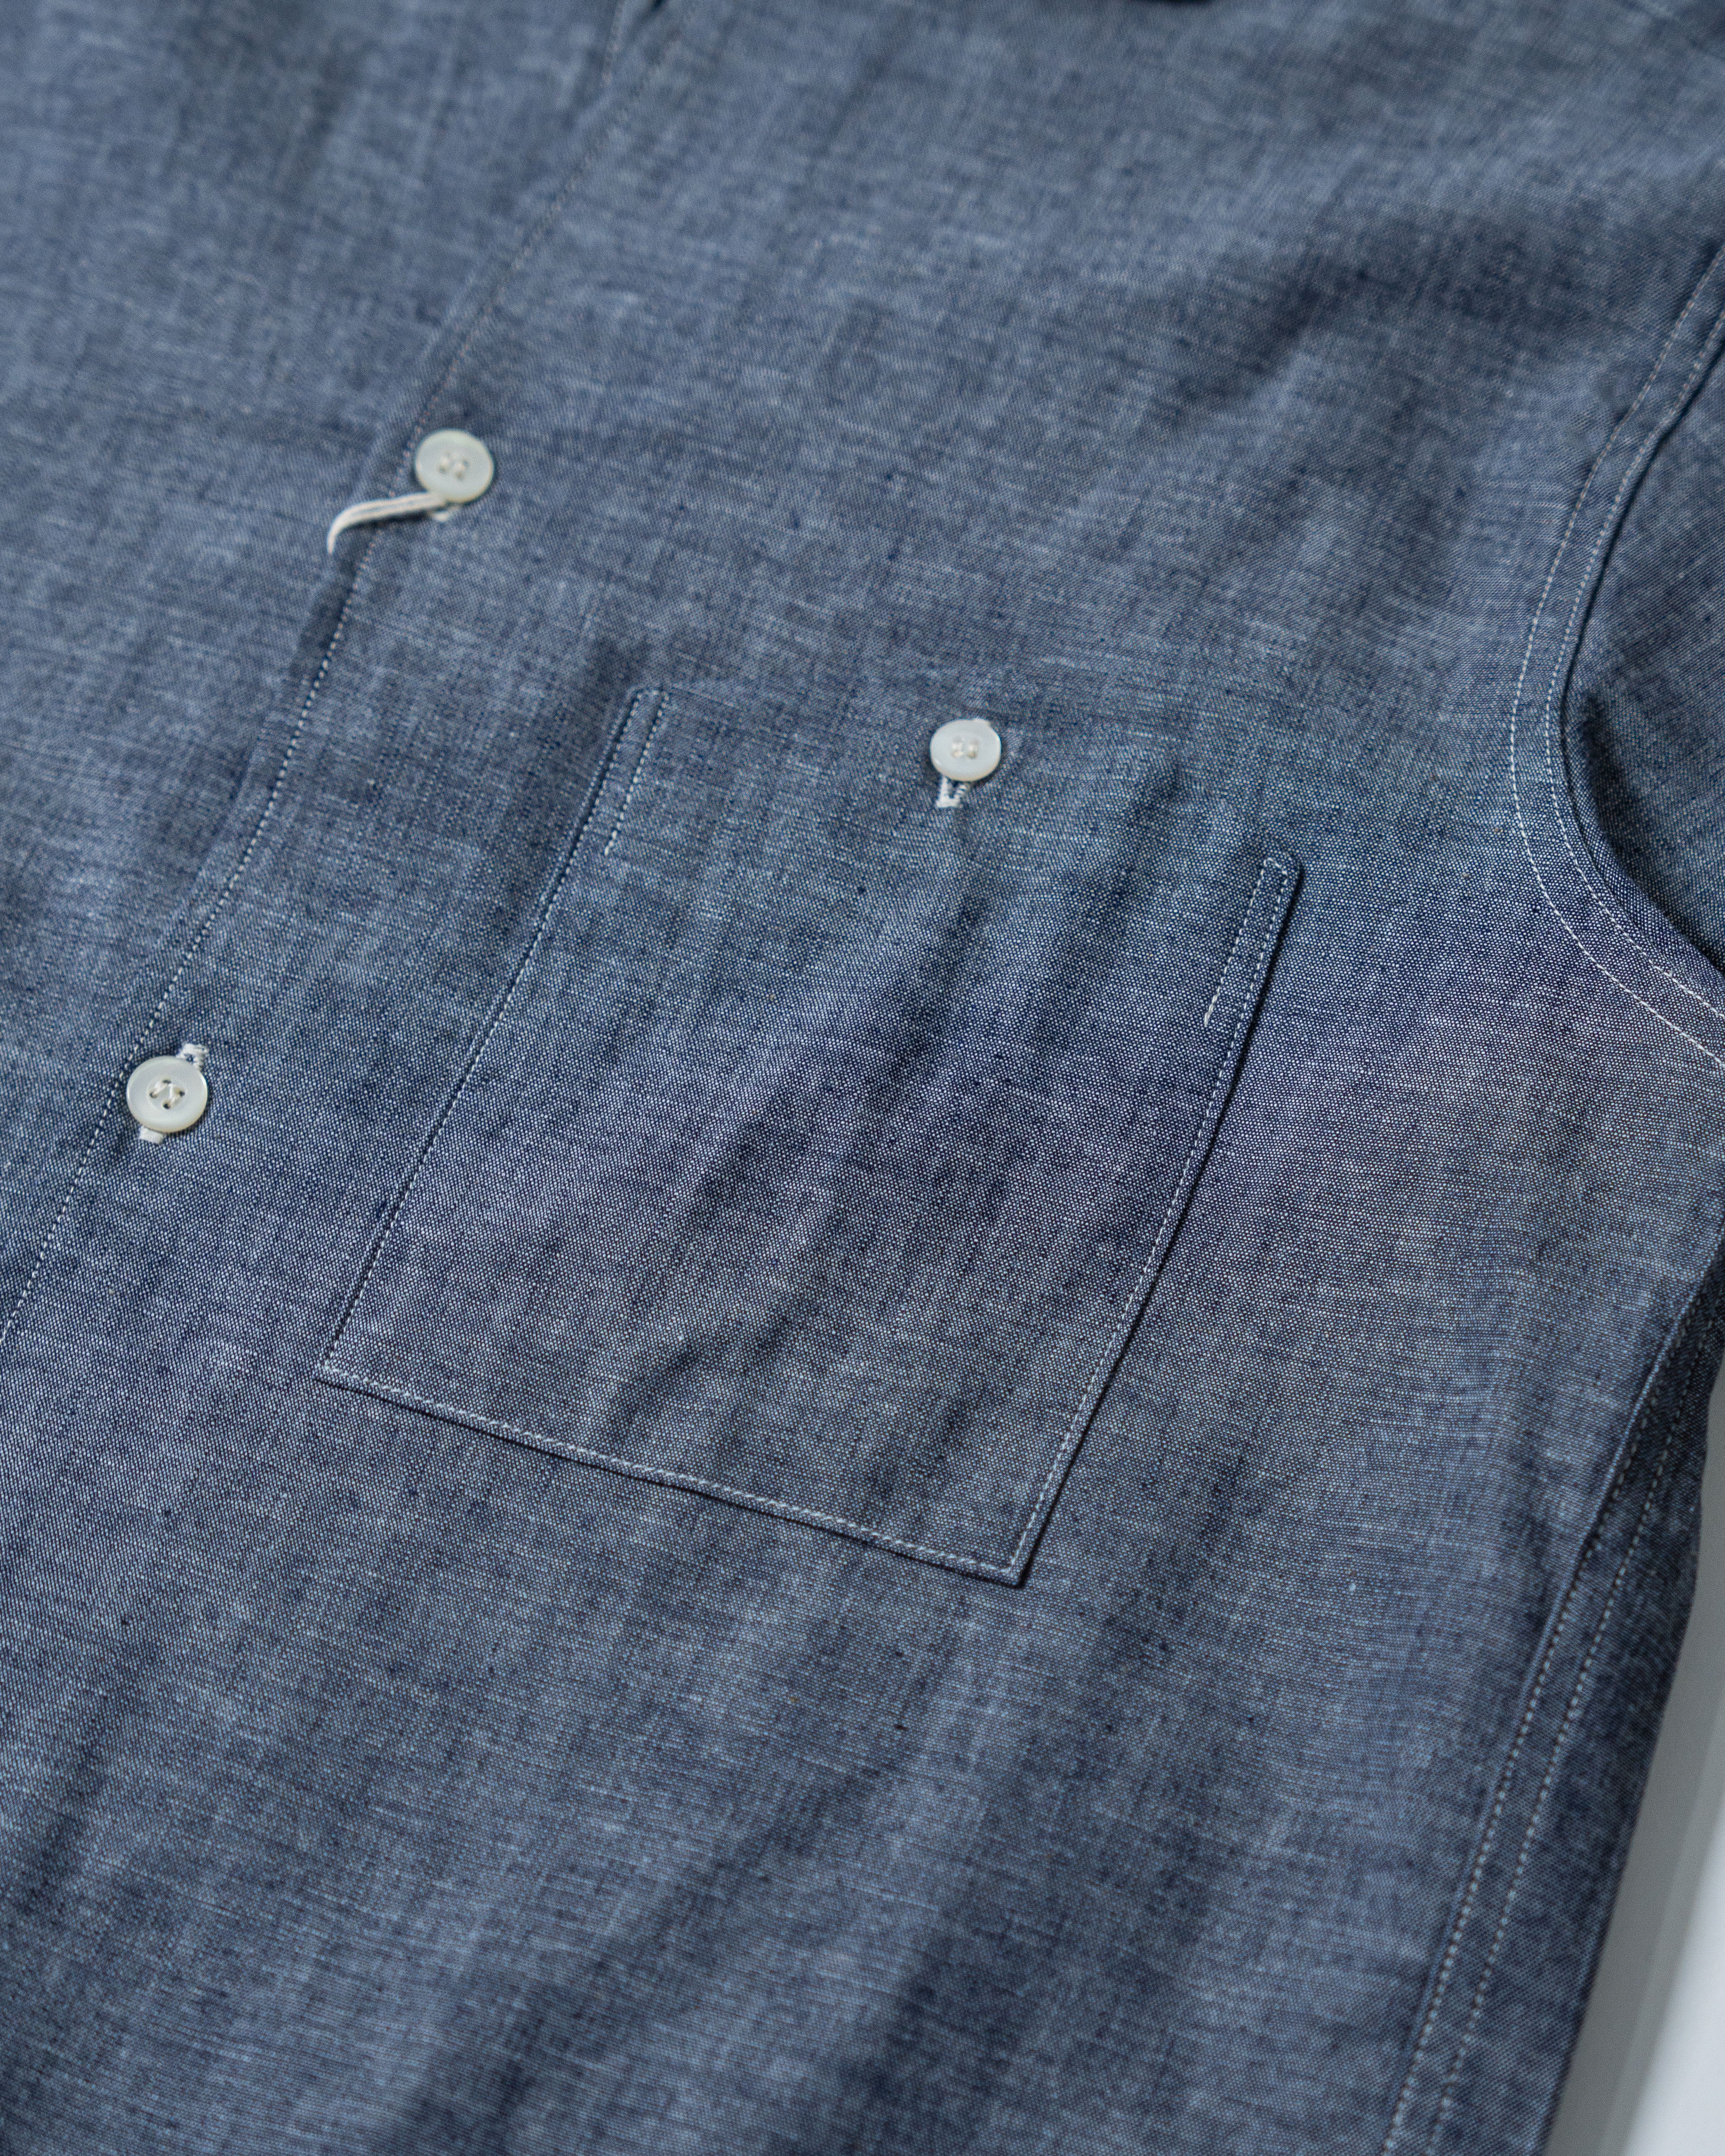 S/S Open Collar Shirts 3091 | Navy Chambray